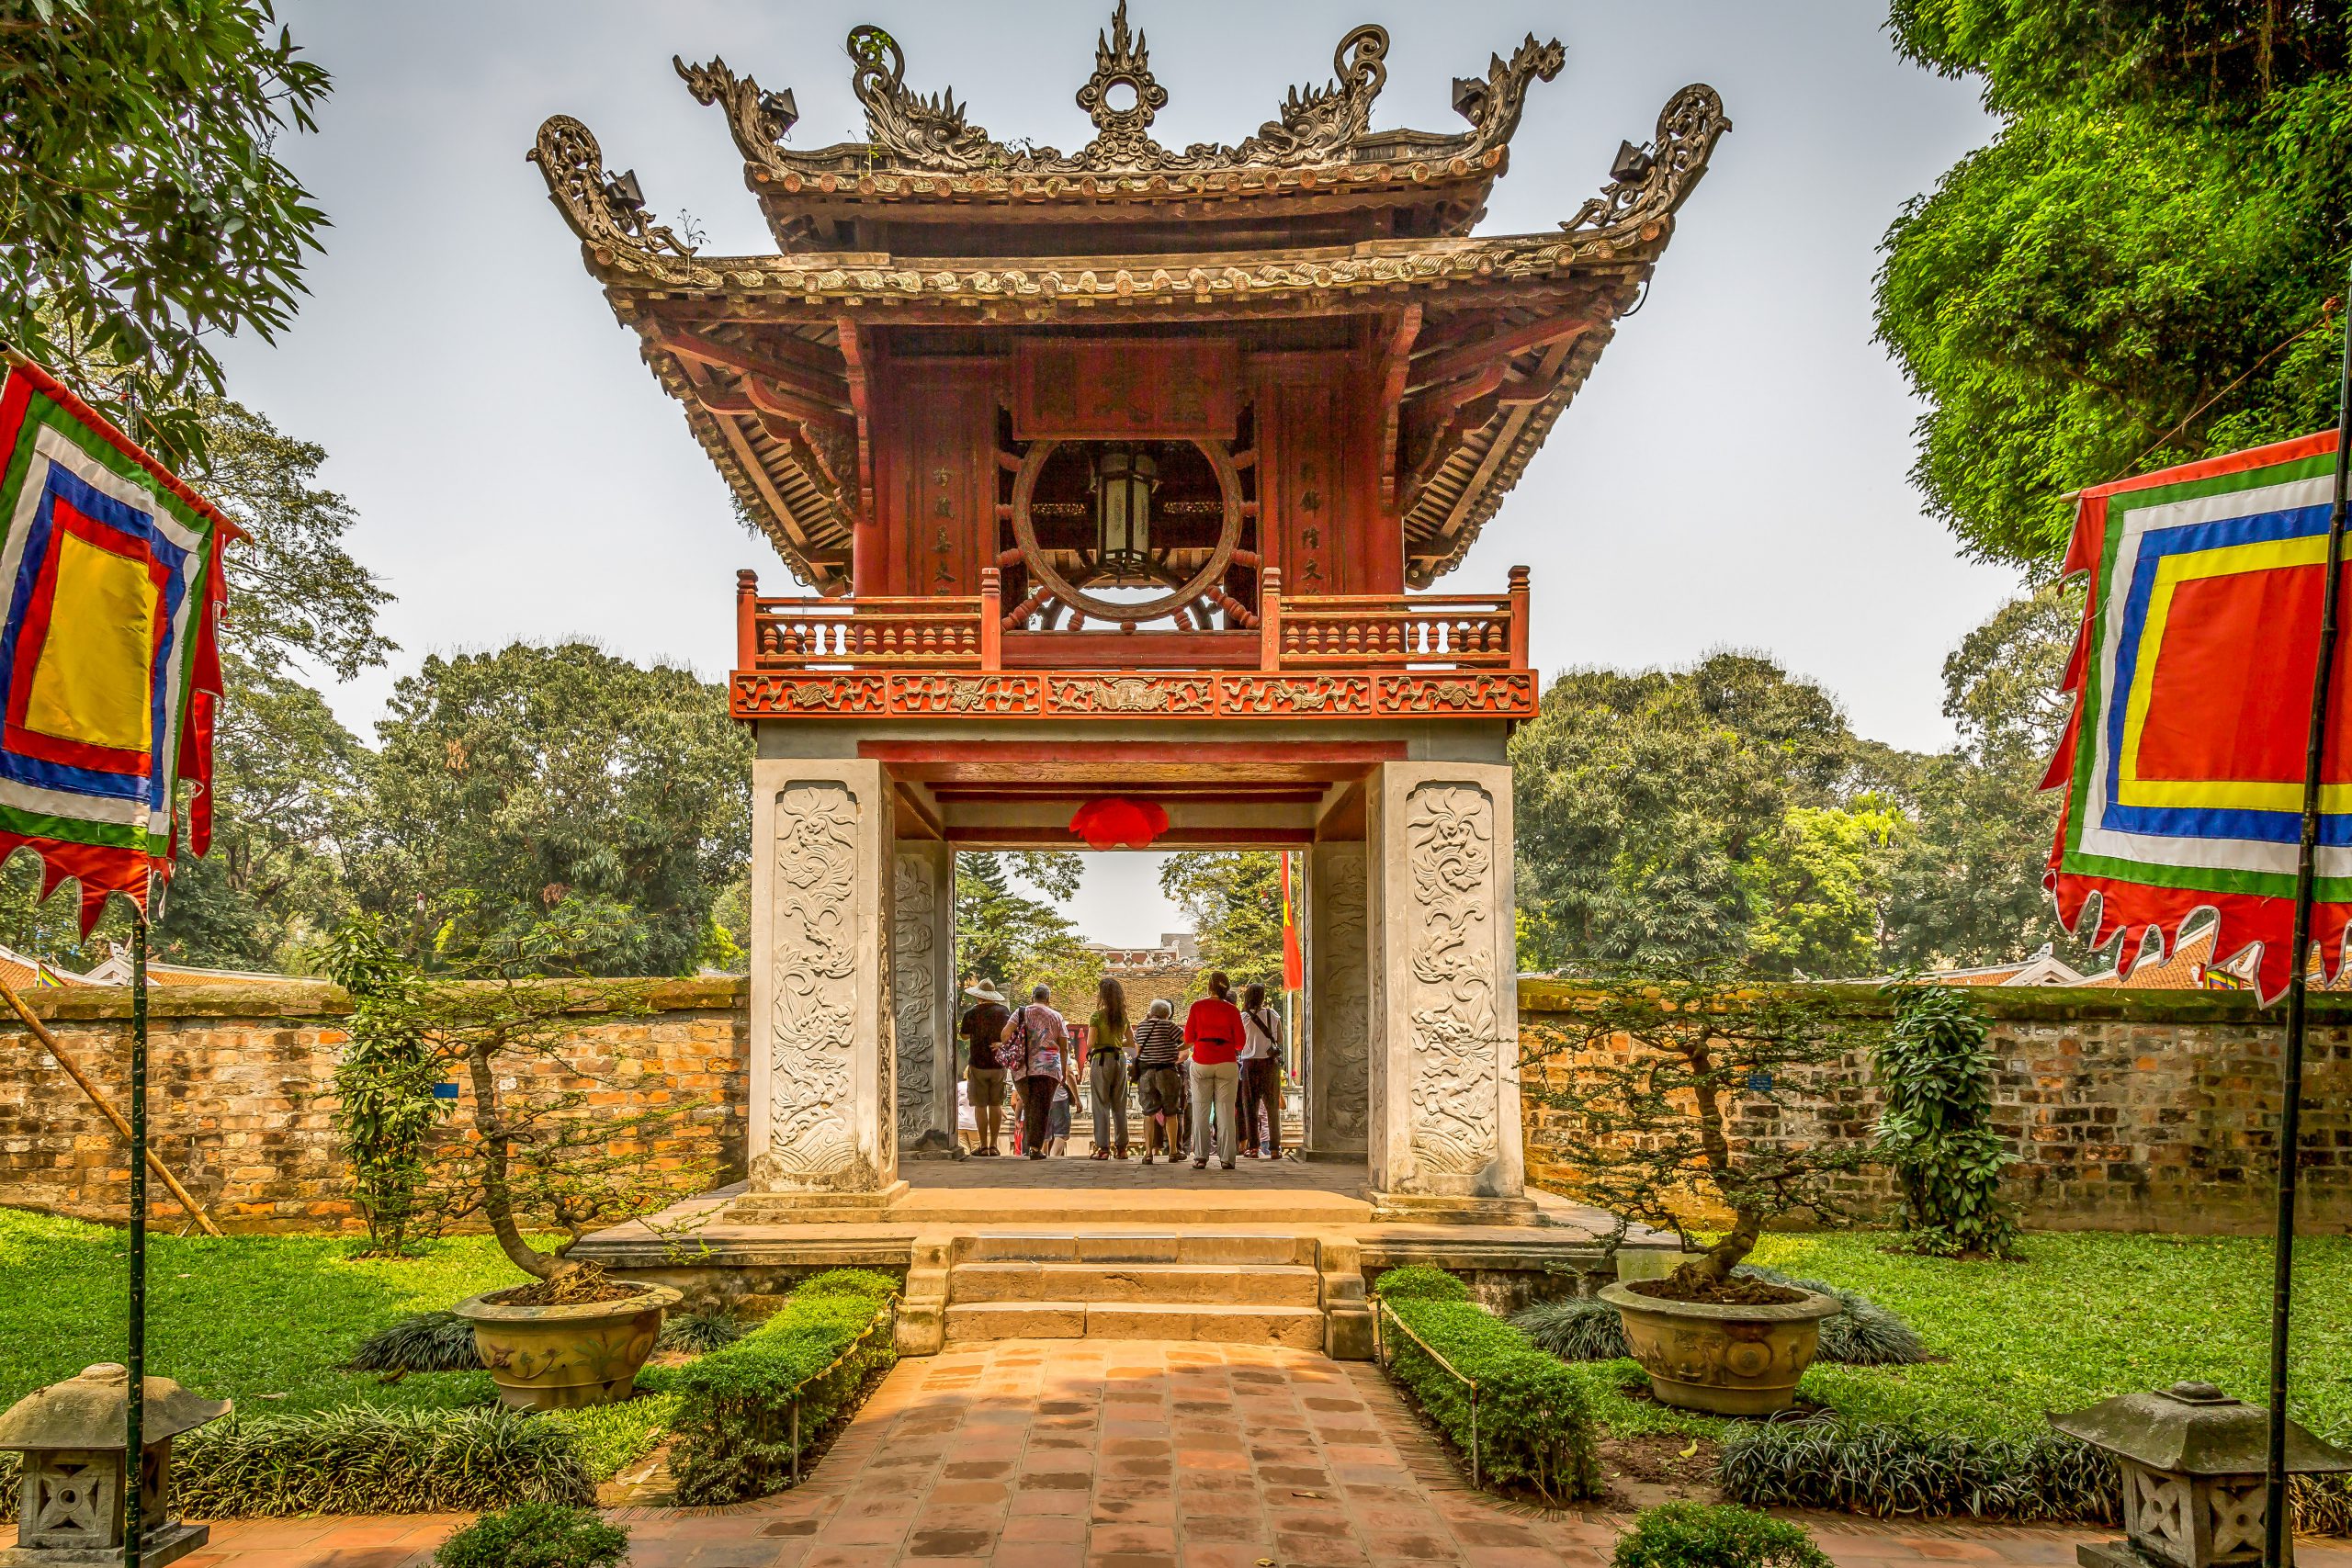 500px-photo-id-105526313-the-temple-of-literature-is-a-temple-of-confucius-in-hanoi-northern-vietnam-the-temple-hosts-the-imperial-academy-vietnams-first-national-university-the-temple-was-b